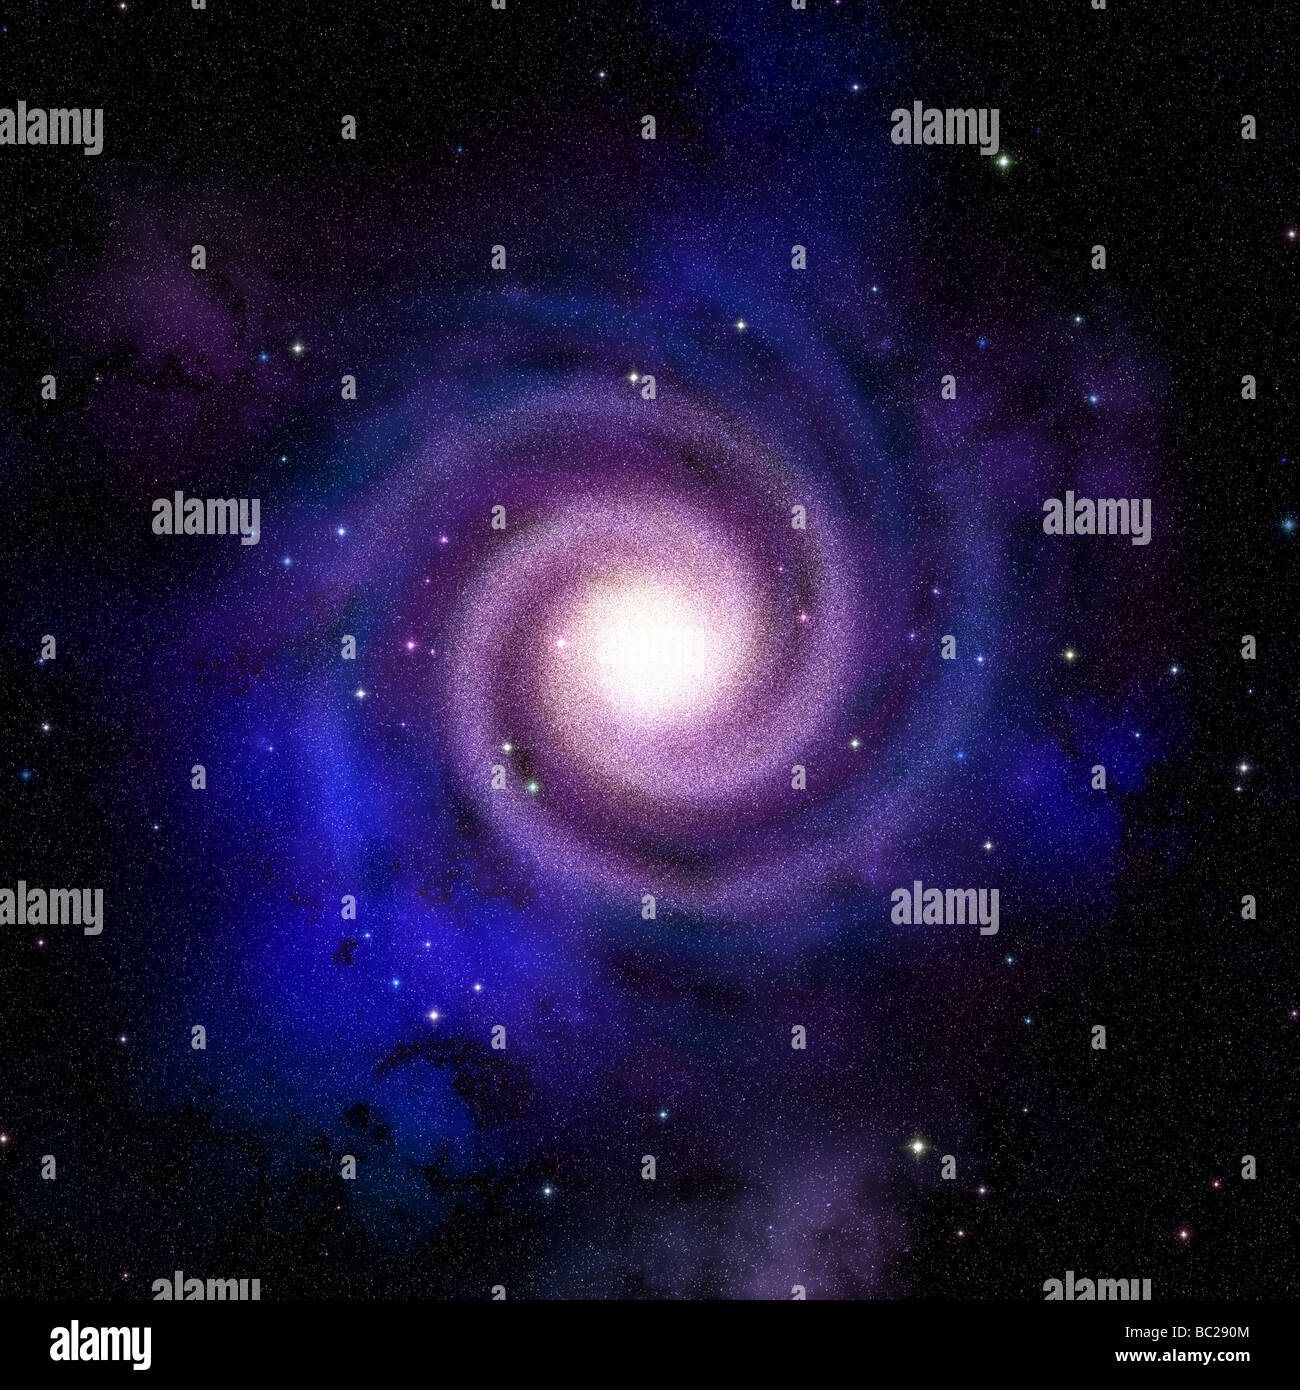 Spiral galaxy top view hypothetical presentation of our own galaxy Milky Way Stock Photo